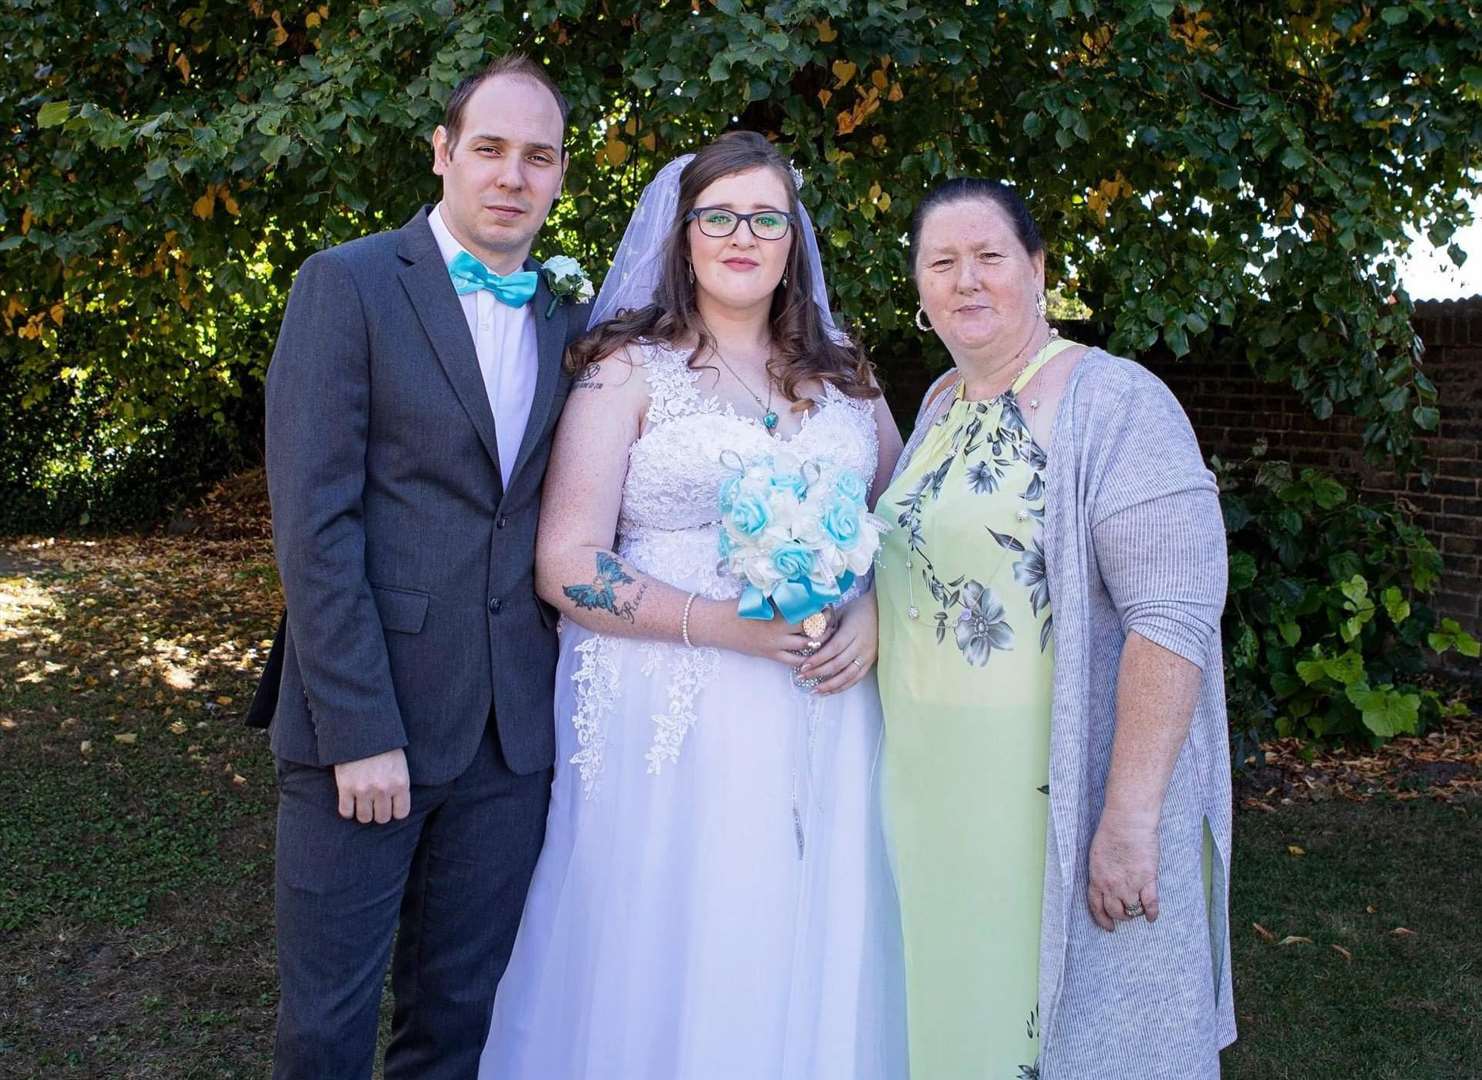 Lorraine with son John and his wife Caitlin on their wedding day